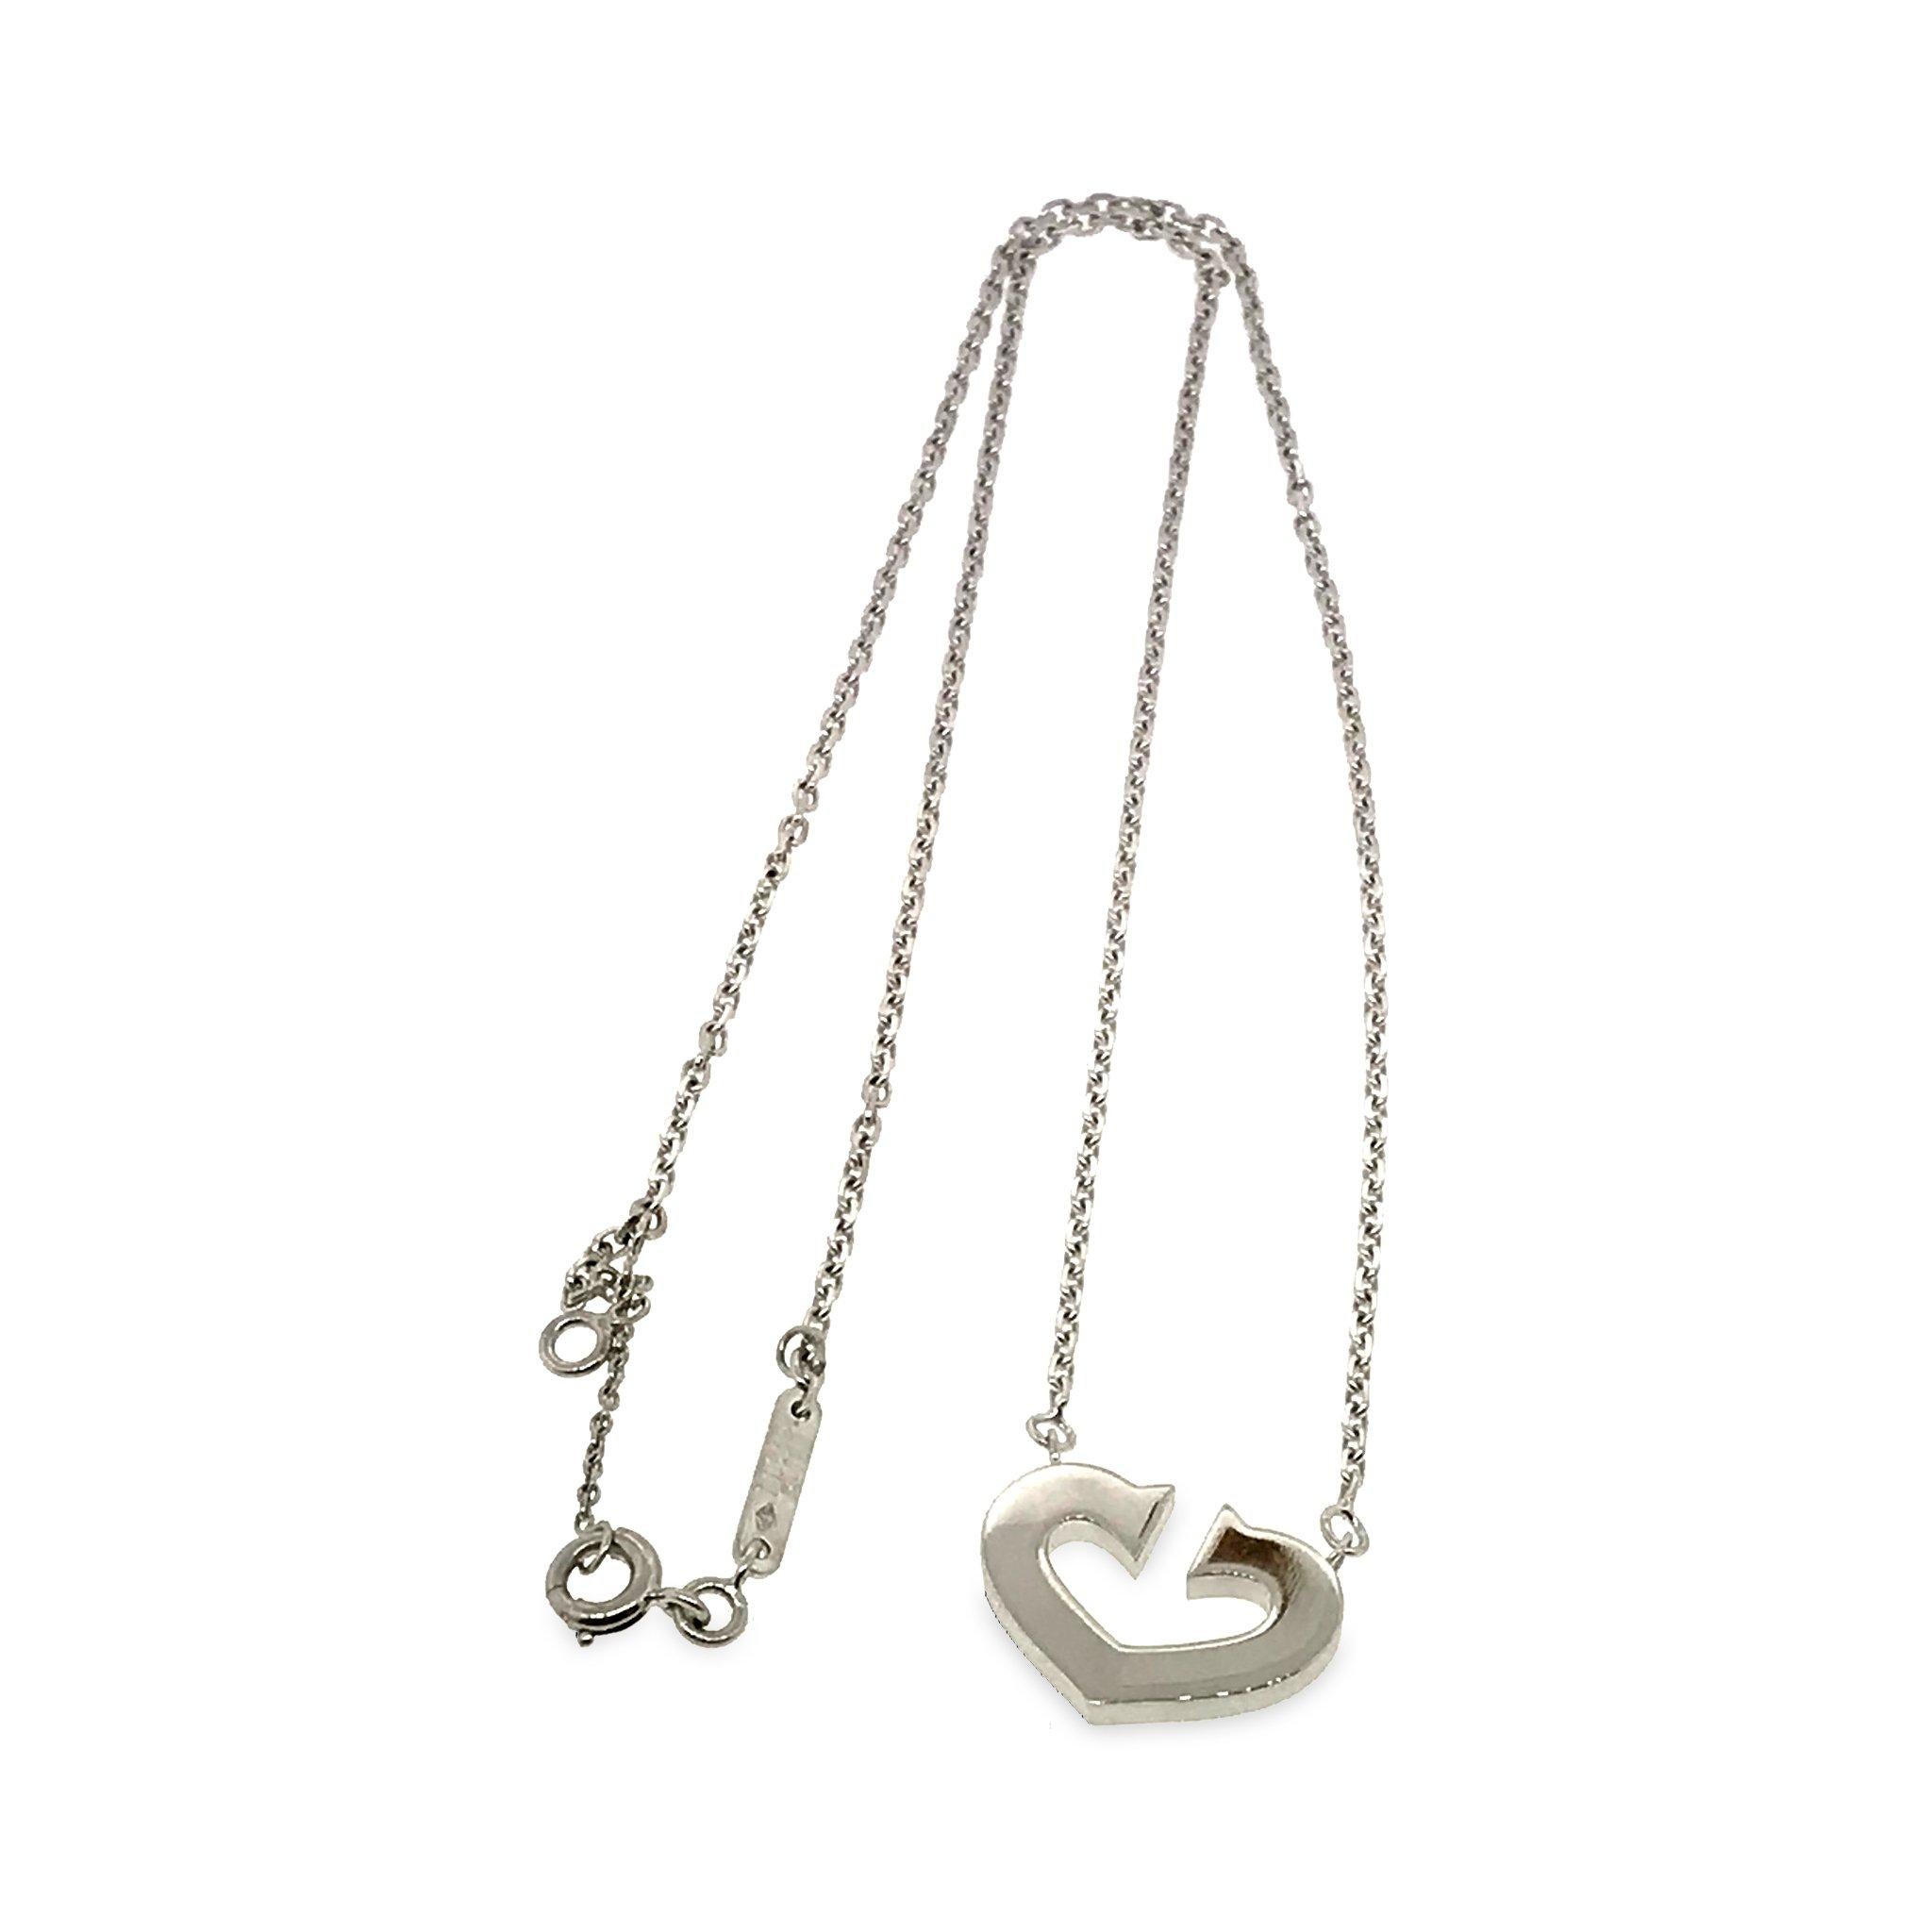 METAL TYPE: 18K White Gold
TOTAL WEIGHT: 7.2g
NECKLACE LENGTH: 16